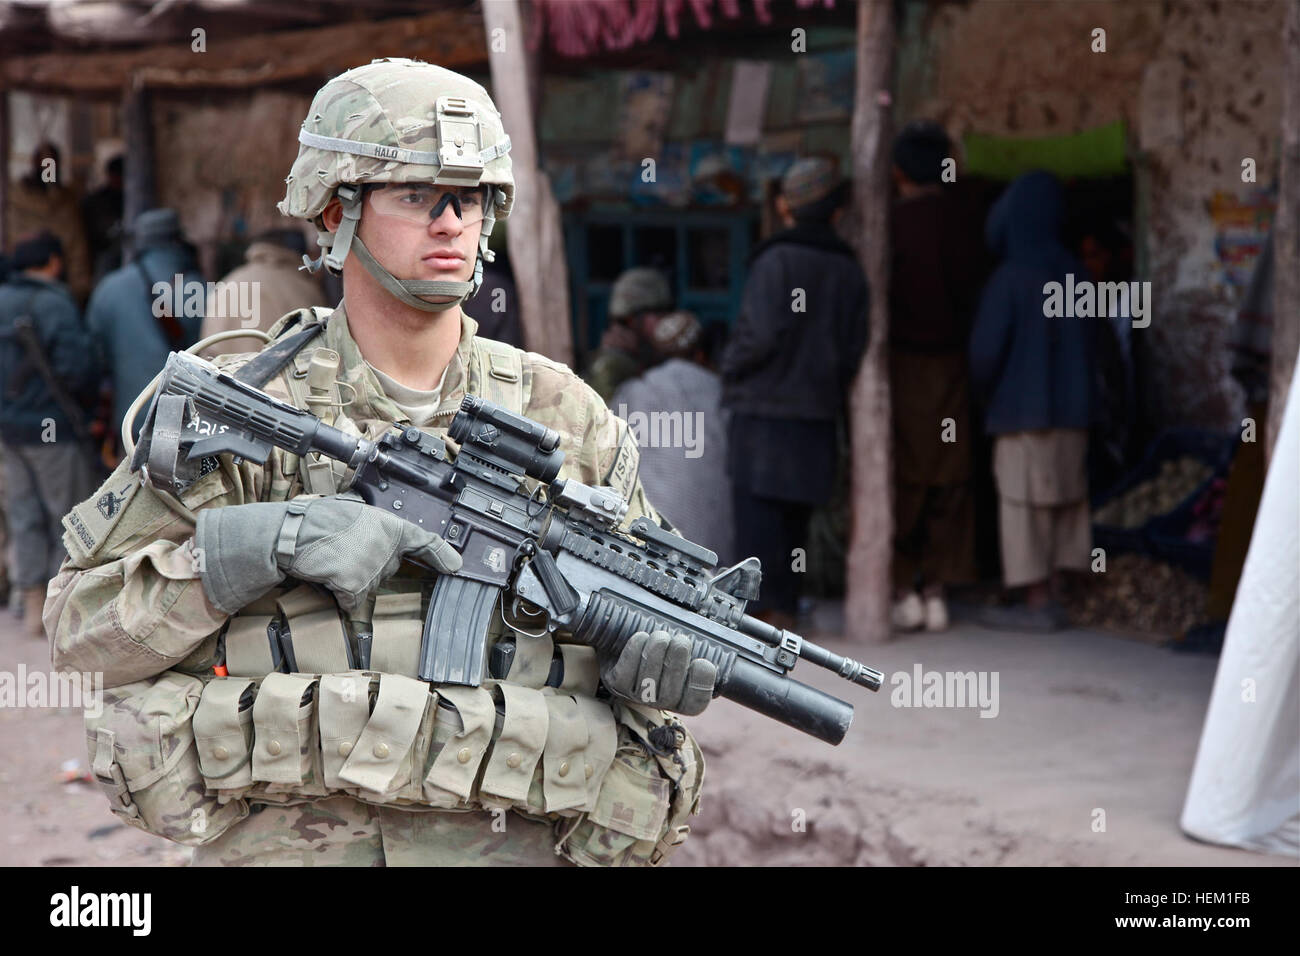 U.S. Army Pvt. John Halo, from Germantown, Md., serving with 2nd Platoon, A Company, 141st Infantry Regiment, 3rd Infantry Brigade Combat Team, 1st Armored Division, Fort Bliss, Texas, provides security in the Azrah district bazaar, Logar province, Afghanistan, Jan. 2, 2012. The objective of the mission was for U.S. forces to build relationships with the Afghan Uniformed Police and local populous. Operation Mongoose 120102-A-BZ540-130 Stock Photo